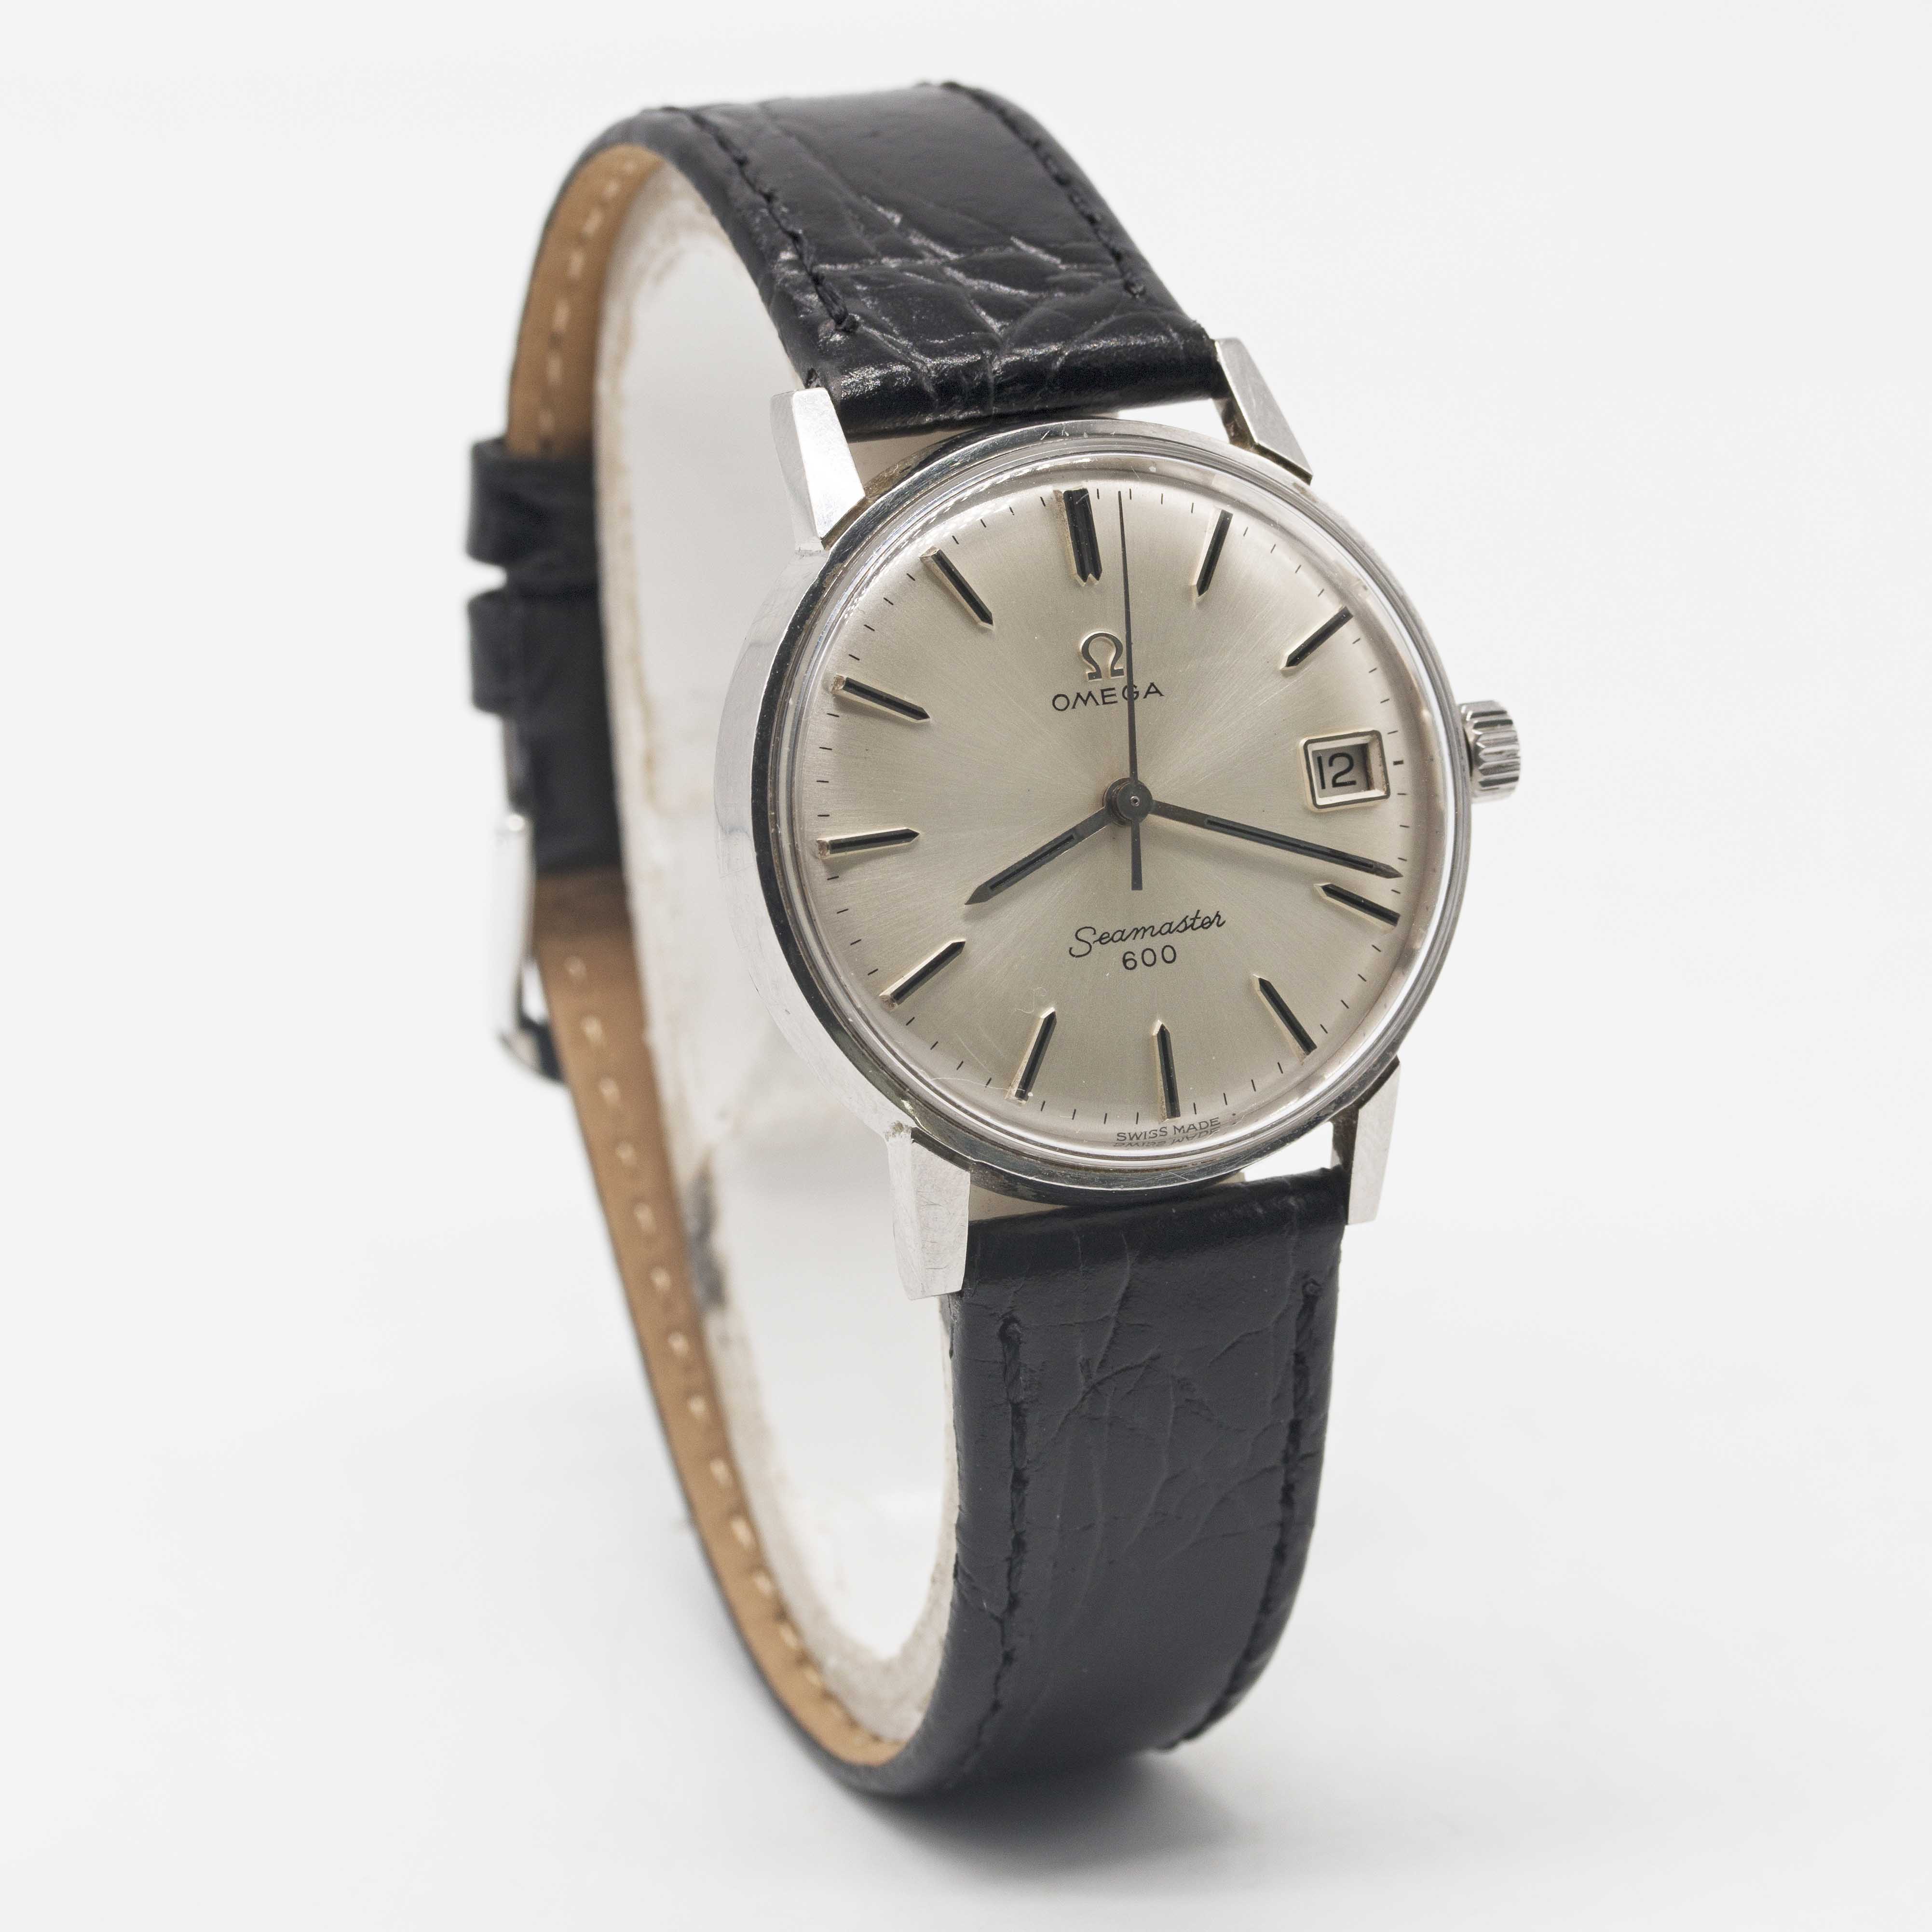 A GENTLEMAN'S STAINLESS STEEL OMEGA SEAMASTER 600 DATE WRIST WATCH CIRCA 1965, REF. 136.011 - Image 4 of 6